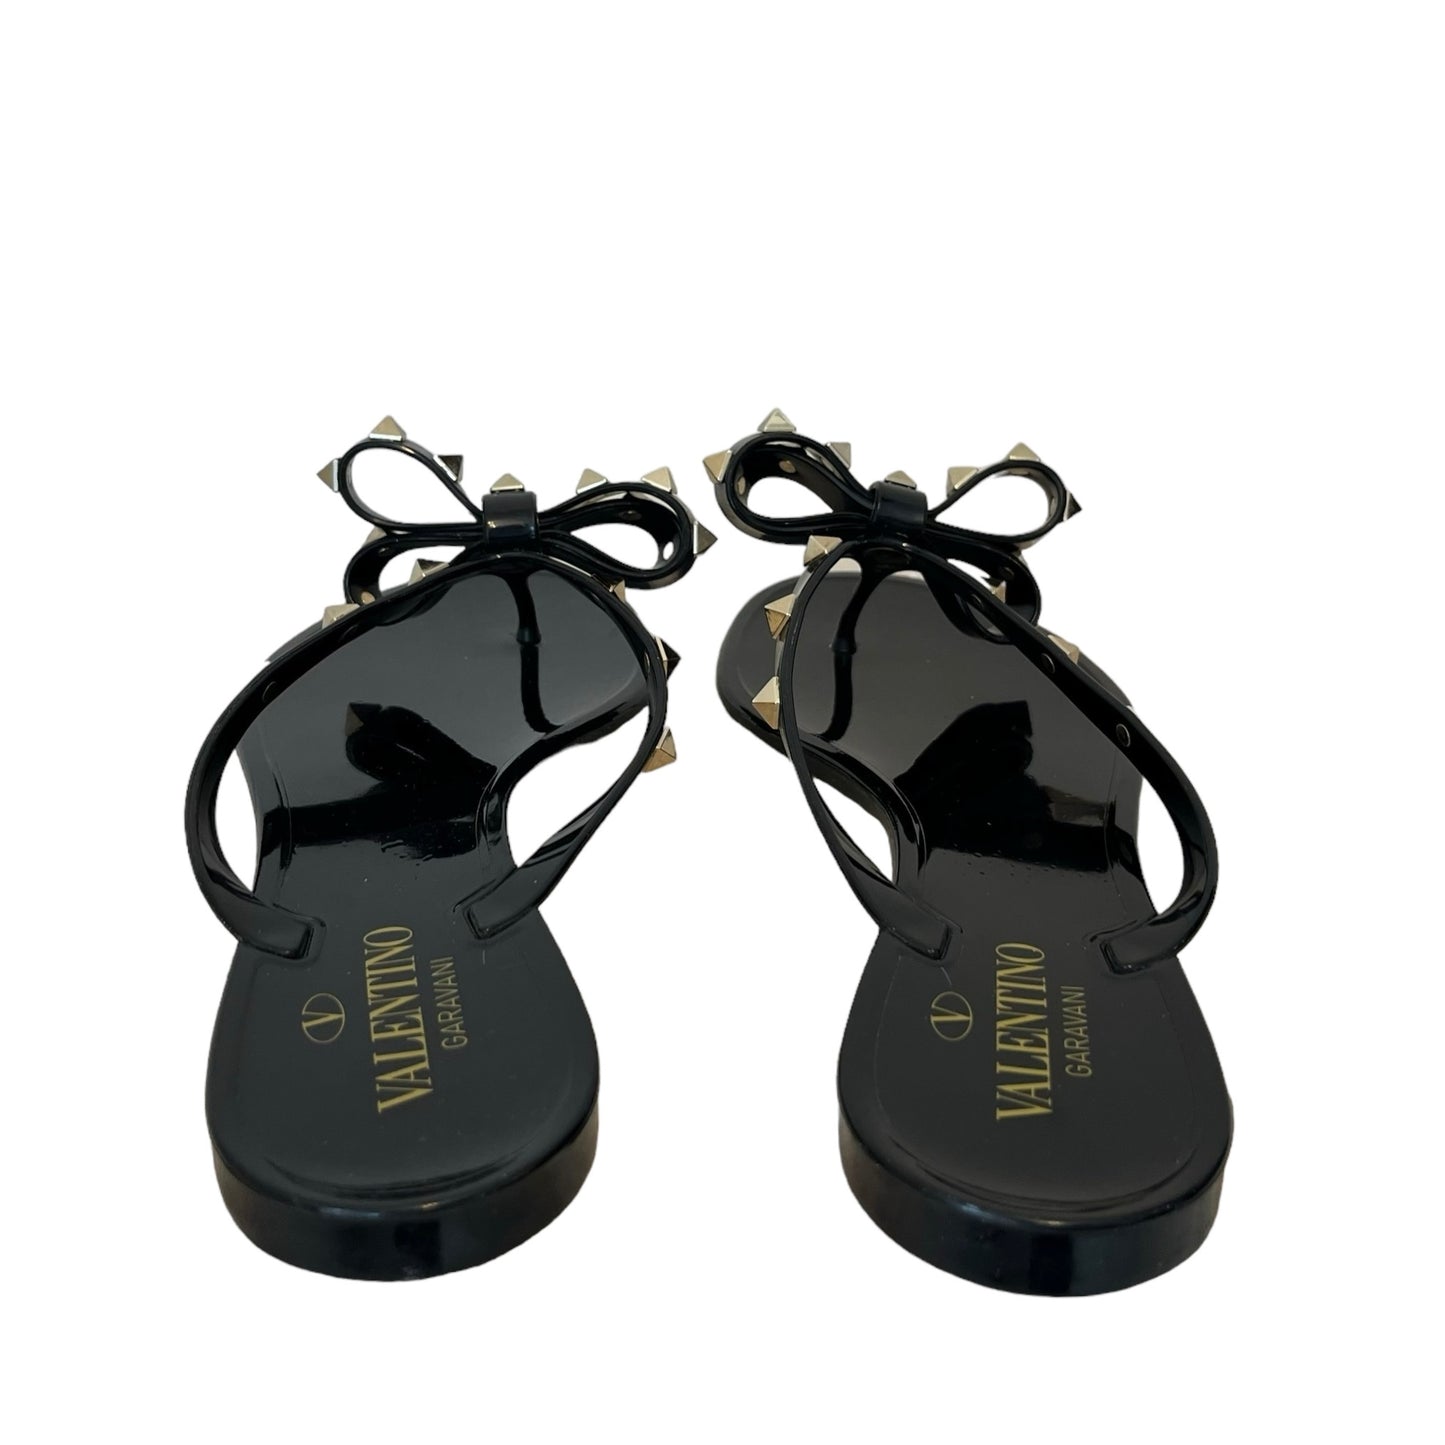 Valentino "Rockstud Accents Bow" Sandals - 40